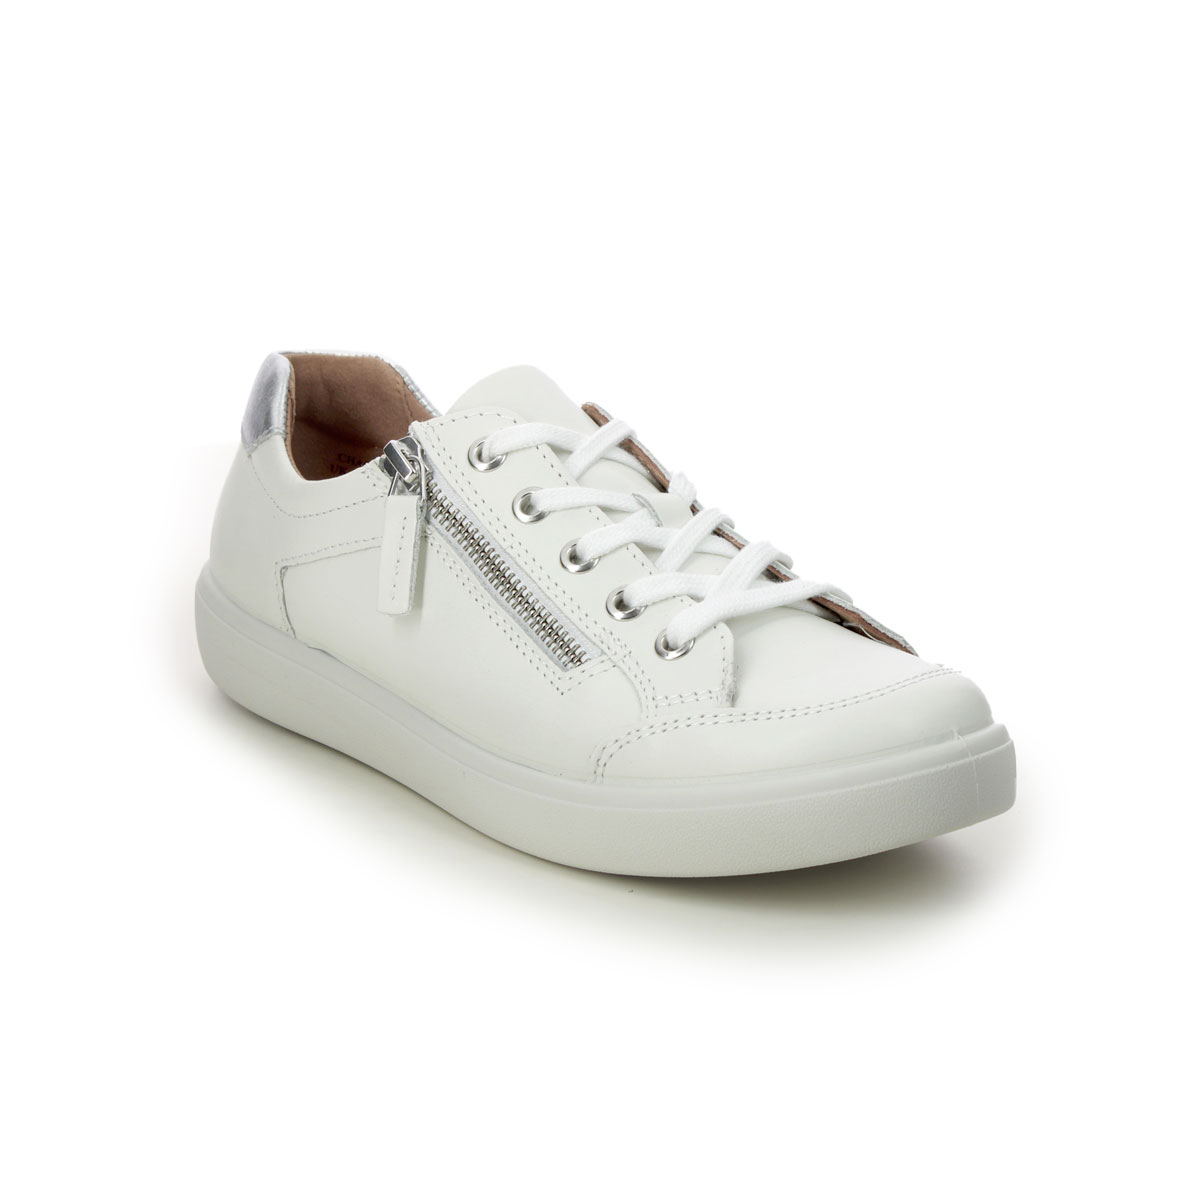 Hotter Chase 2 Wide WHITE LEATHER Womens trainers 16111-61 in a Plain Leather in Size 7